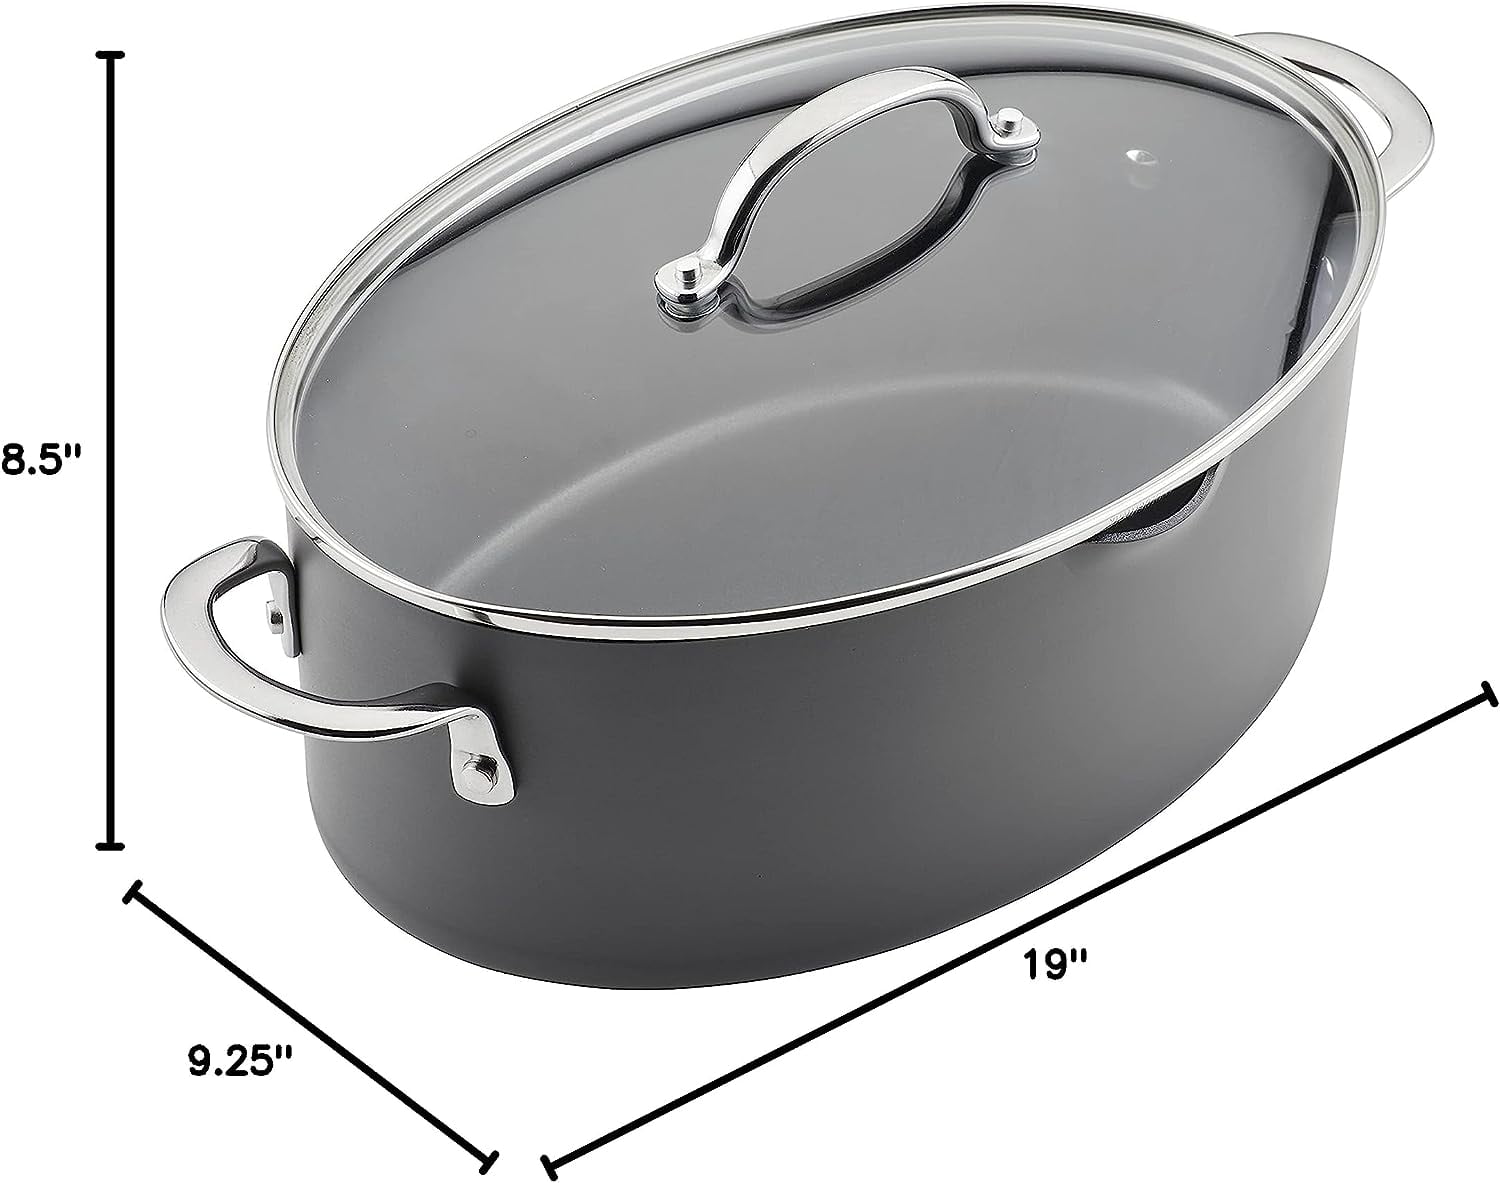 Dropship 8-quart Hard-anodized Nonstick Oval Pasta Pot With Lid And Pour  Spout to Sell Online at a Lower Price